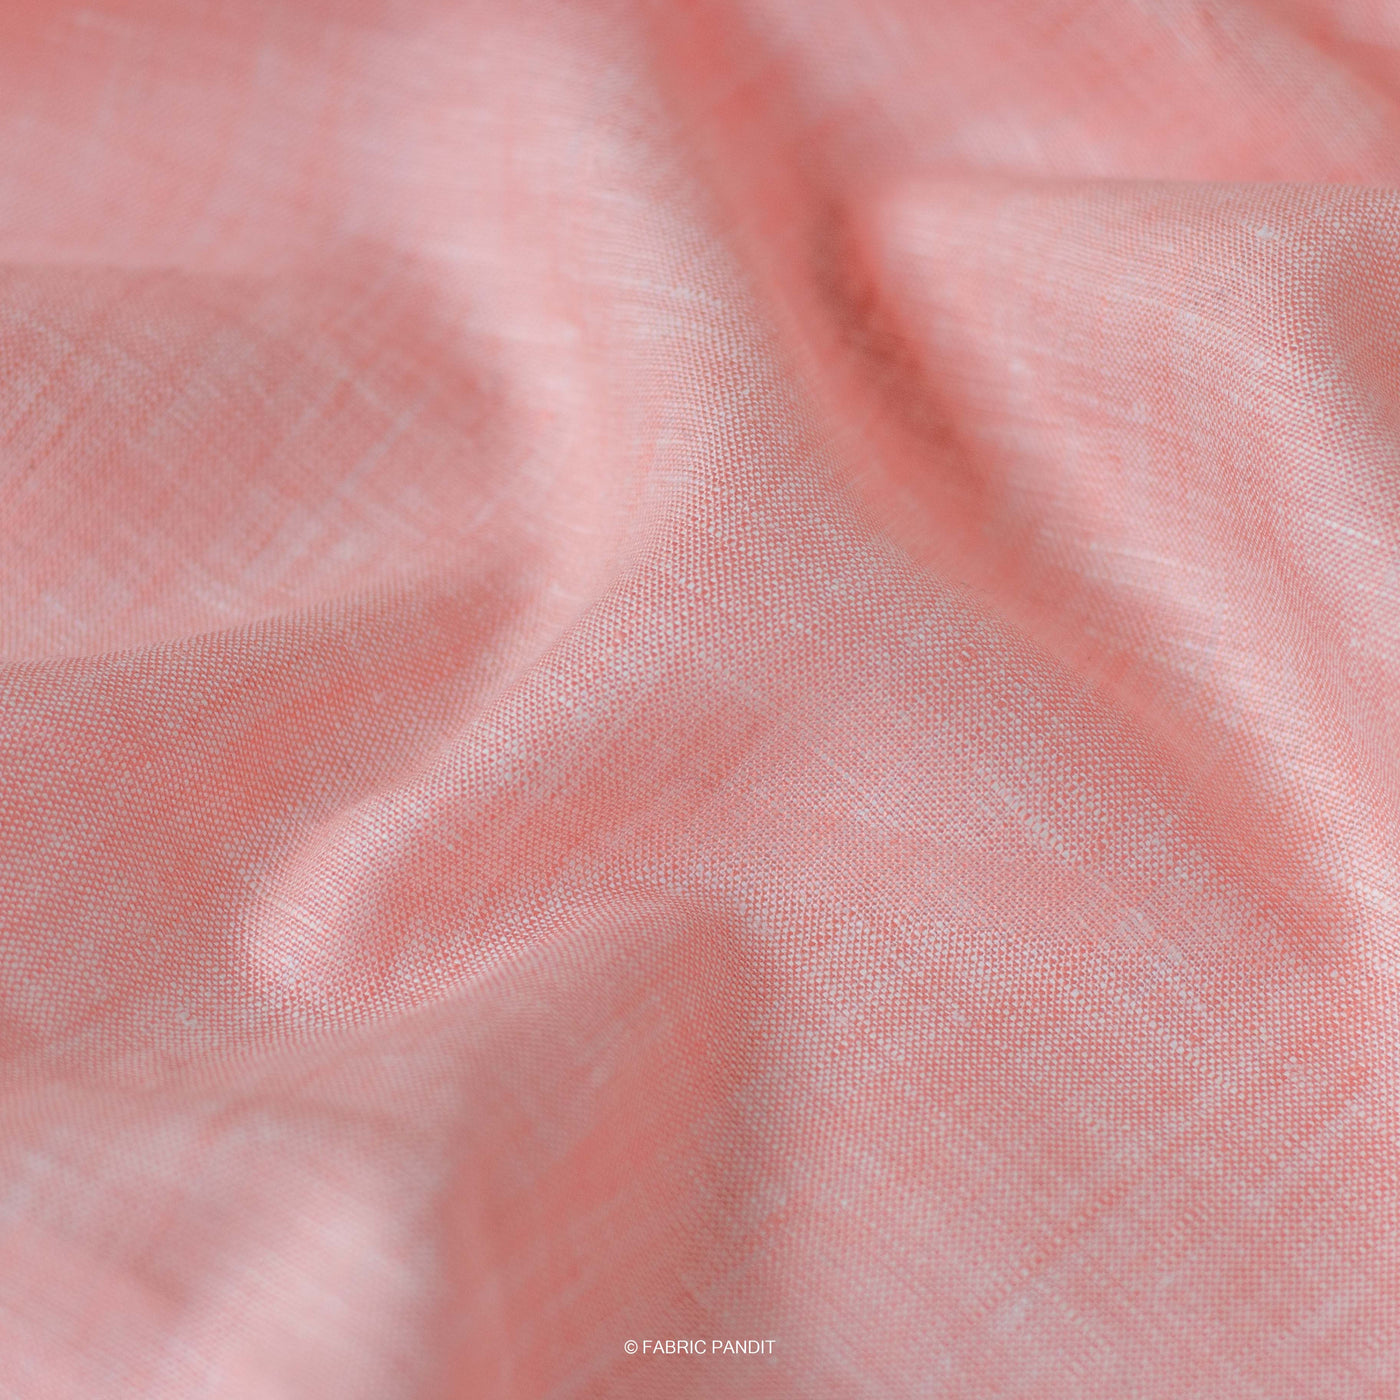 Premium Linen Fabric Cut Piece (CUT PIECE) Candlelight Peach Color Plain Yarn Dyed 60 Lea Pure Linen Fabric (58 Inches)